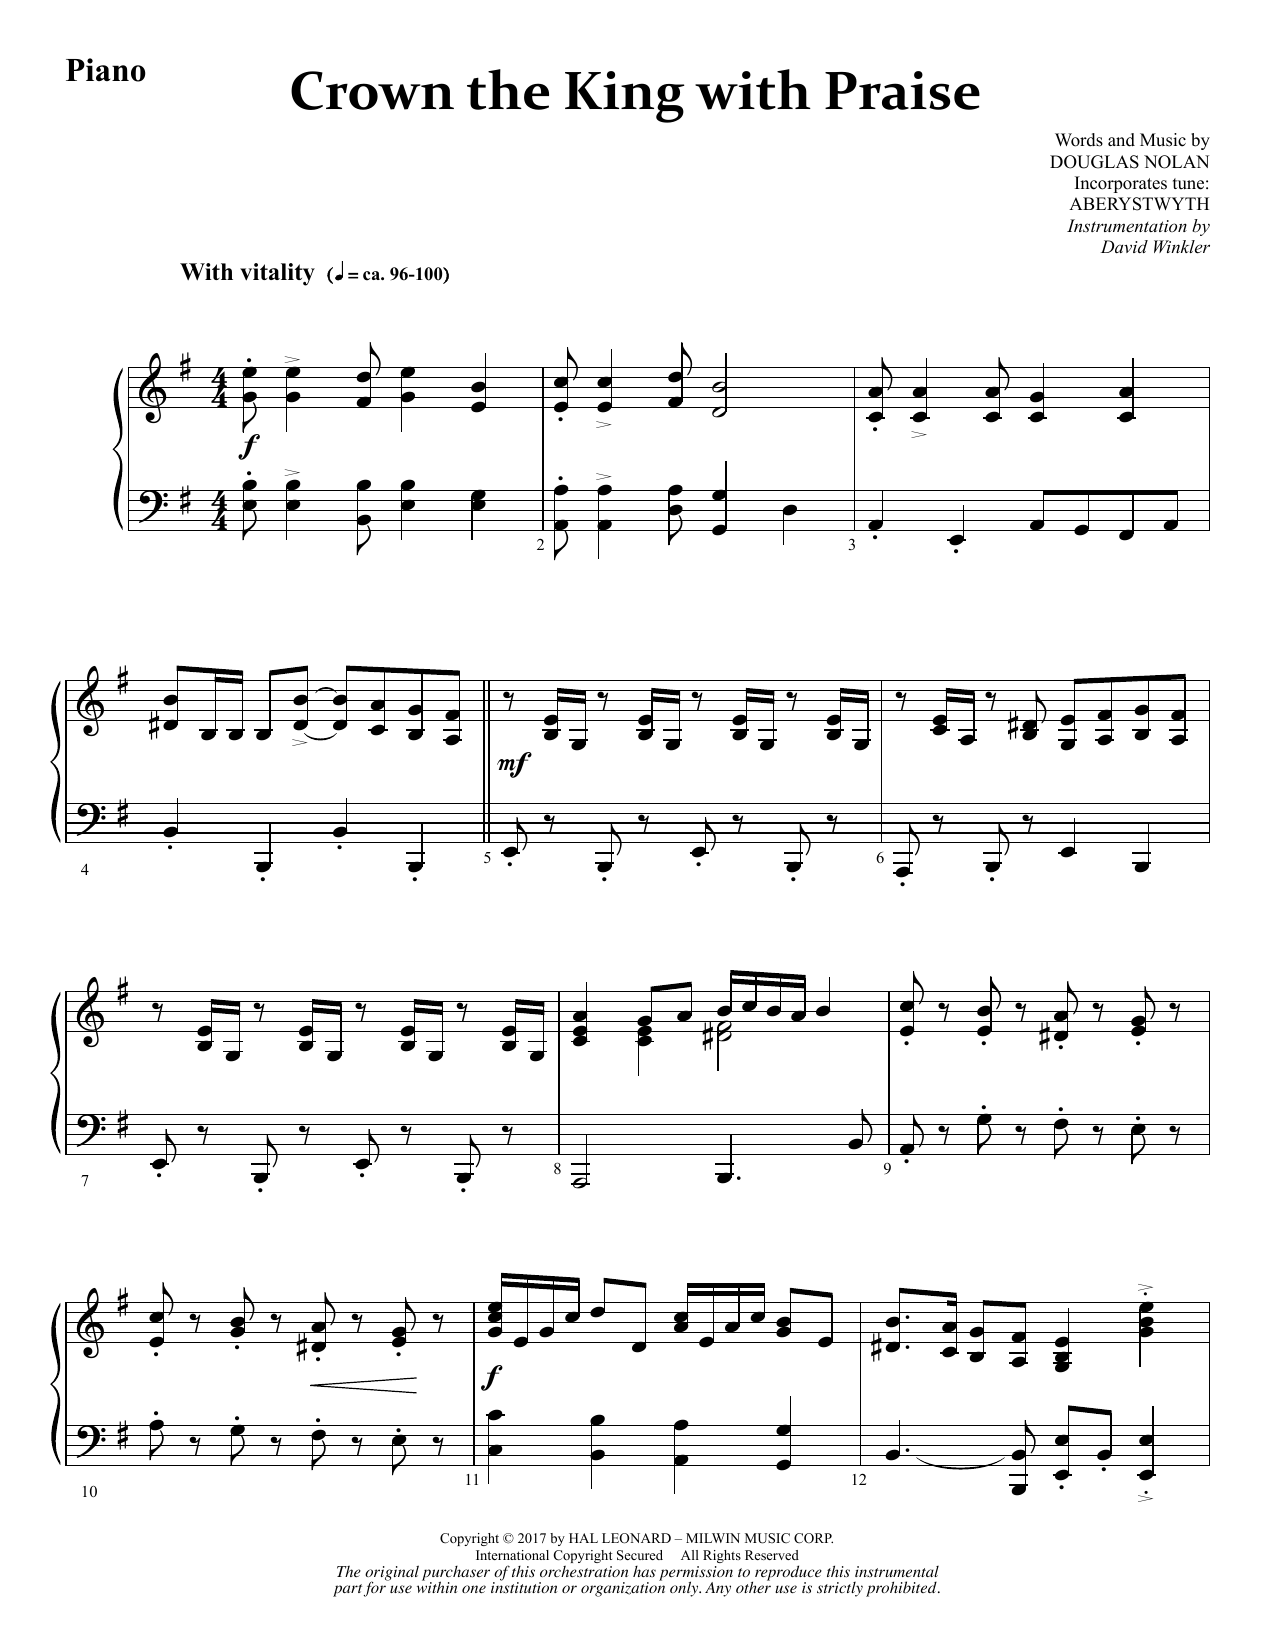 Crown the King with Praise - Piano sheet music